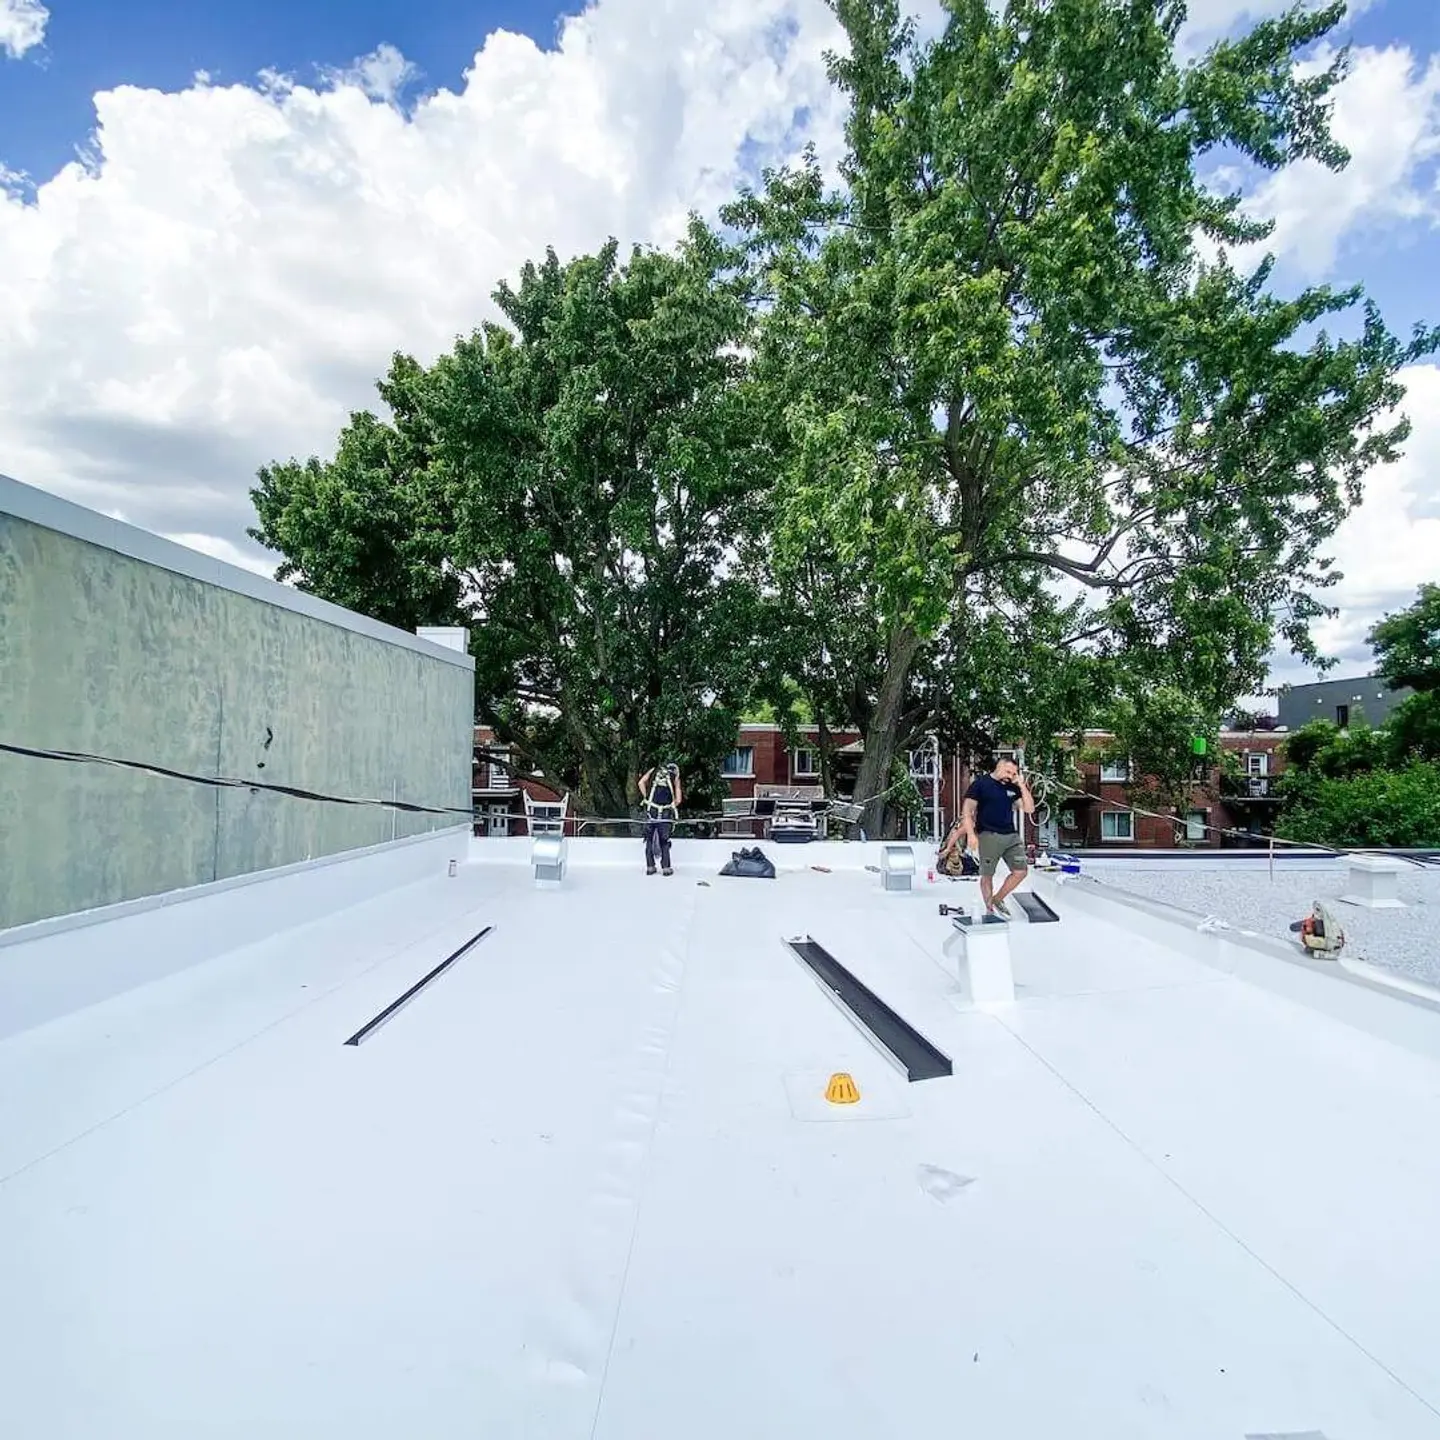 Men working on a flat roof